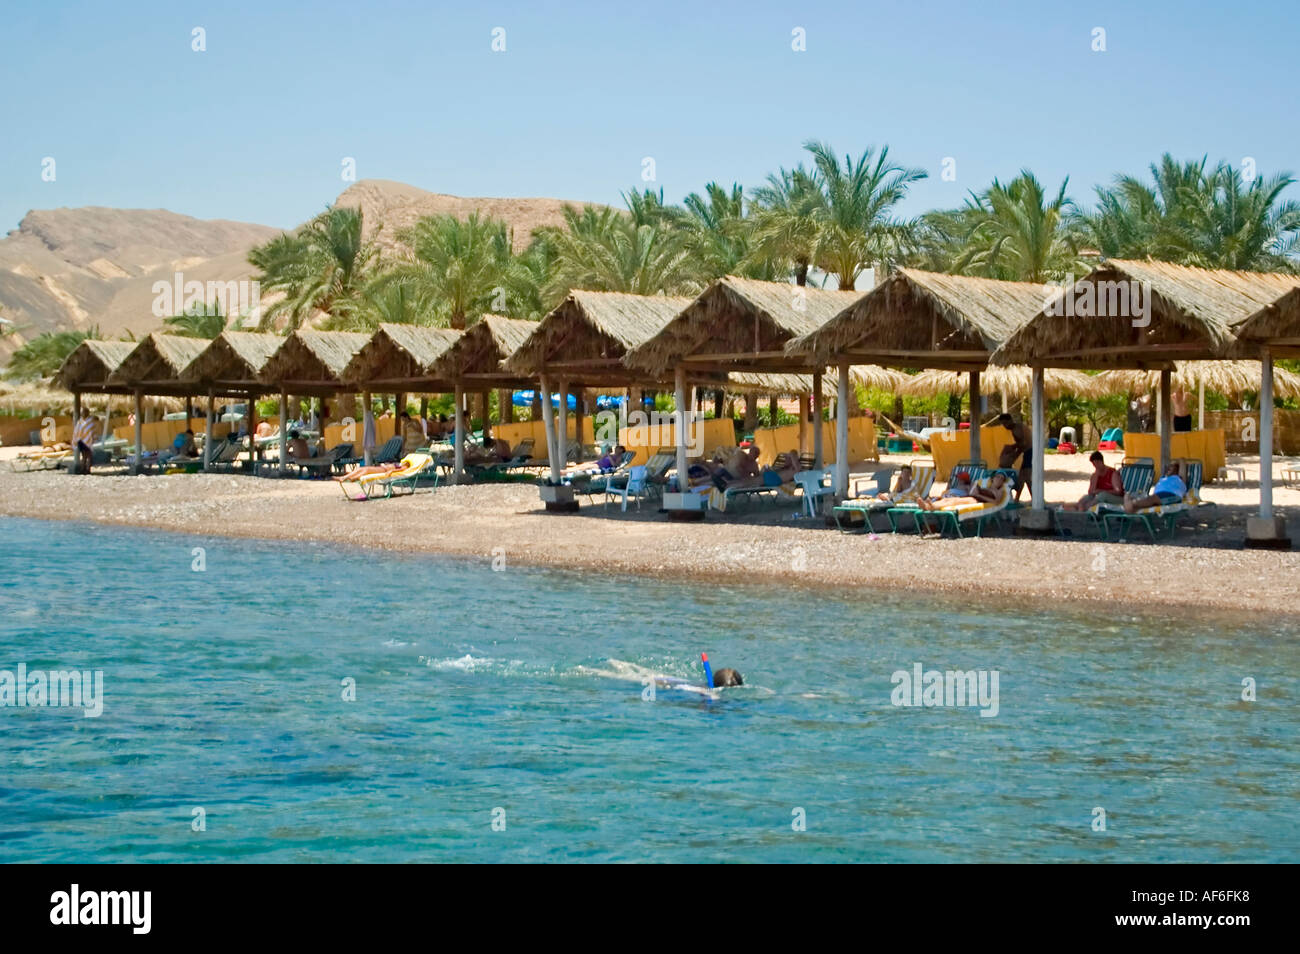 Horizontal wide angle landscape of the coastline at Taba with people sunbathing on the beach, taken from out at sea. Stock Photo